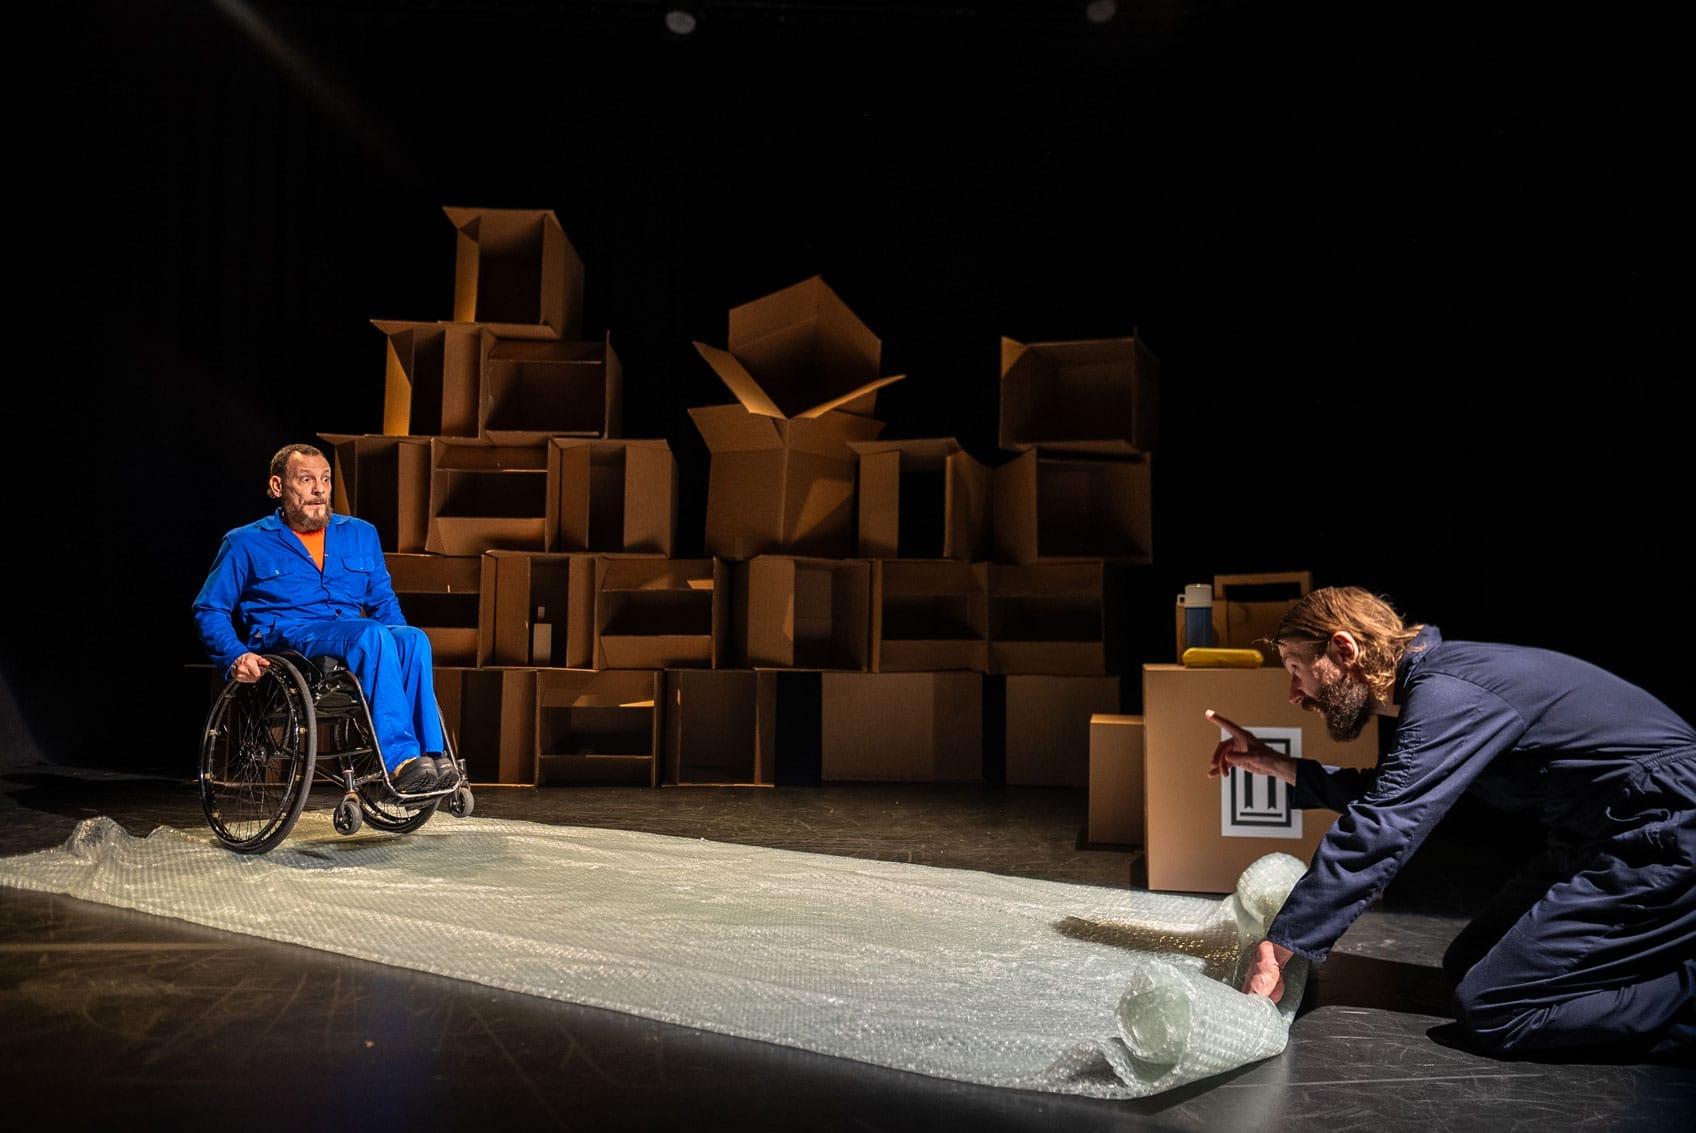 On the floor is a large piece of bubble wrap layer out. At one end Daryl, a white man with a beard in light blue overalls sits in his wheelchair on top of it. in bubble wrap. Jon, a white person with a beard wearing dark blue overalls is at the other end gesturing Daryl to stop. In the background is a wall of cardboard boxes